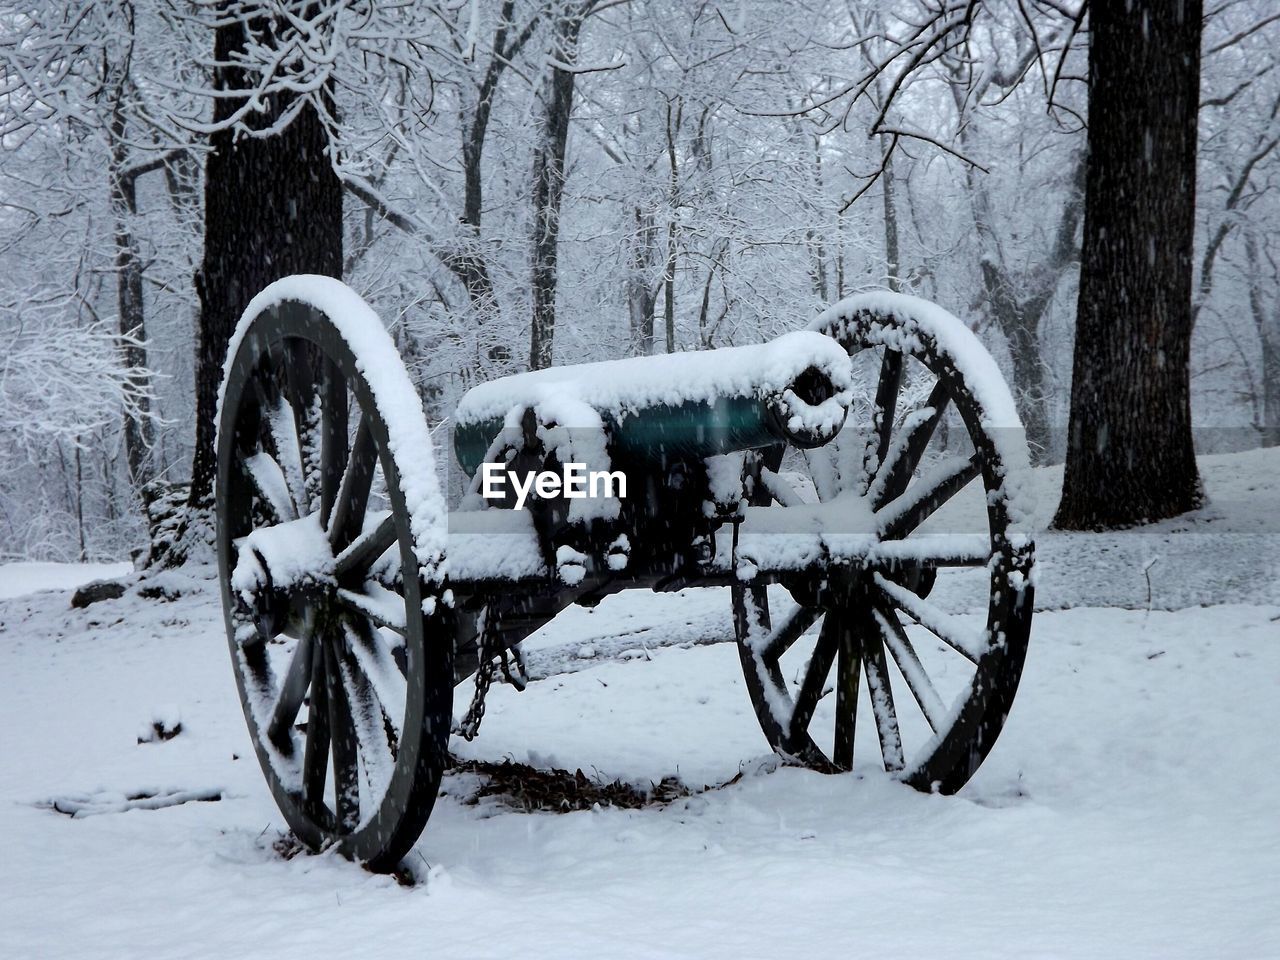 Snow covered cannon on field